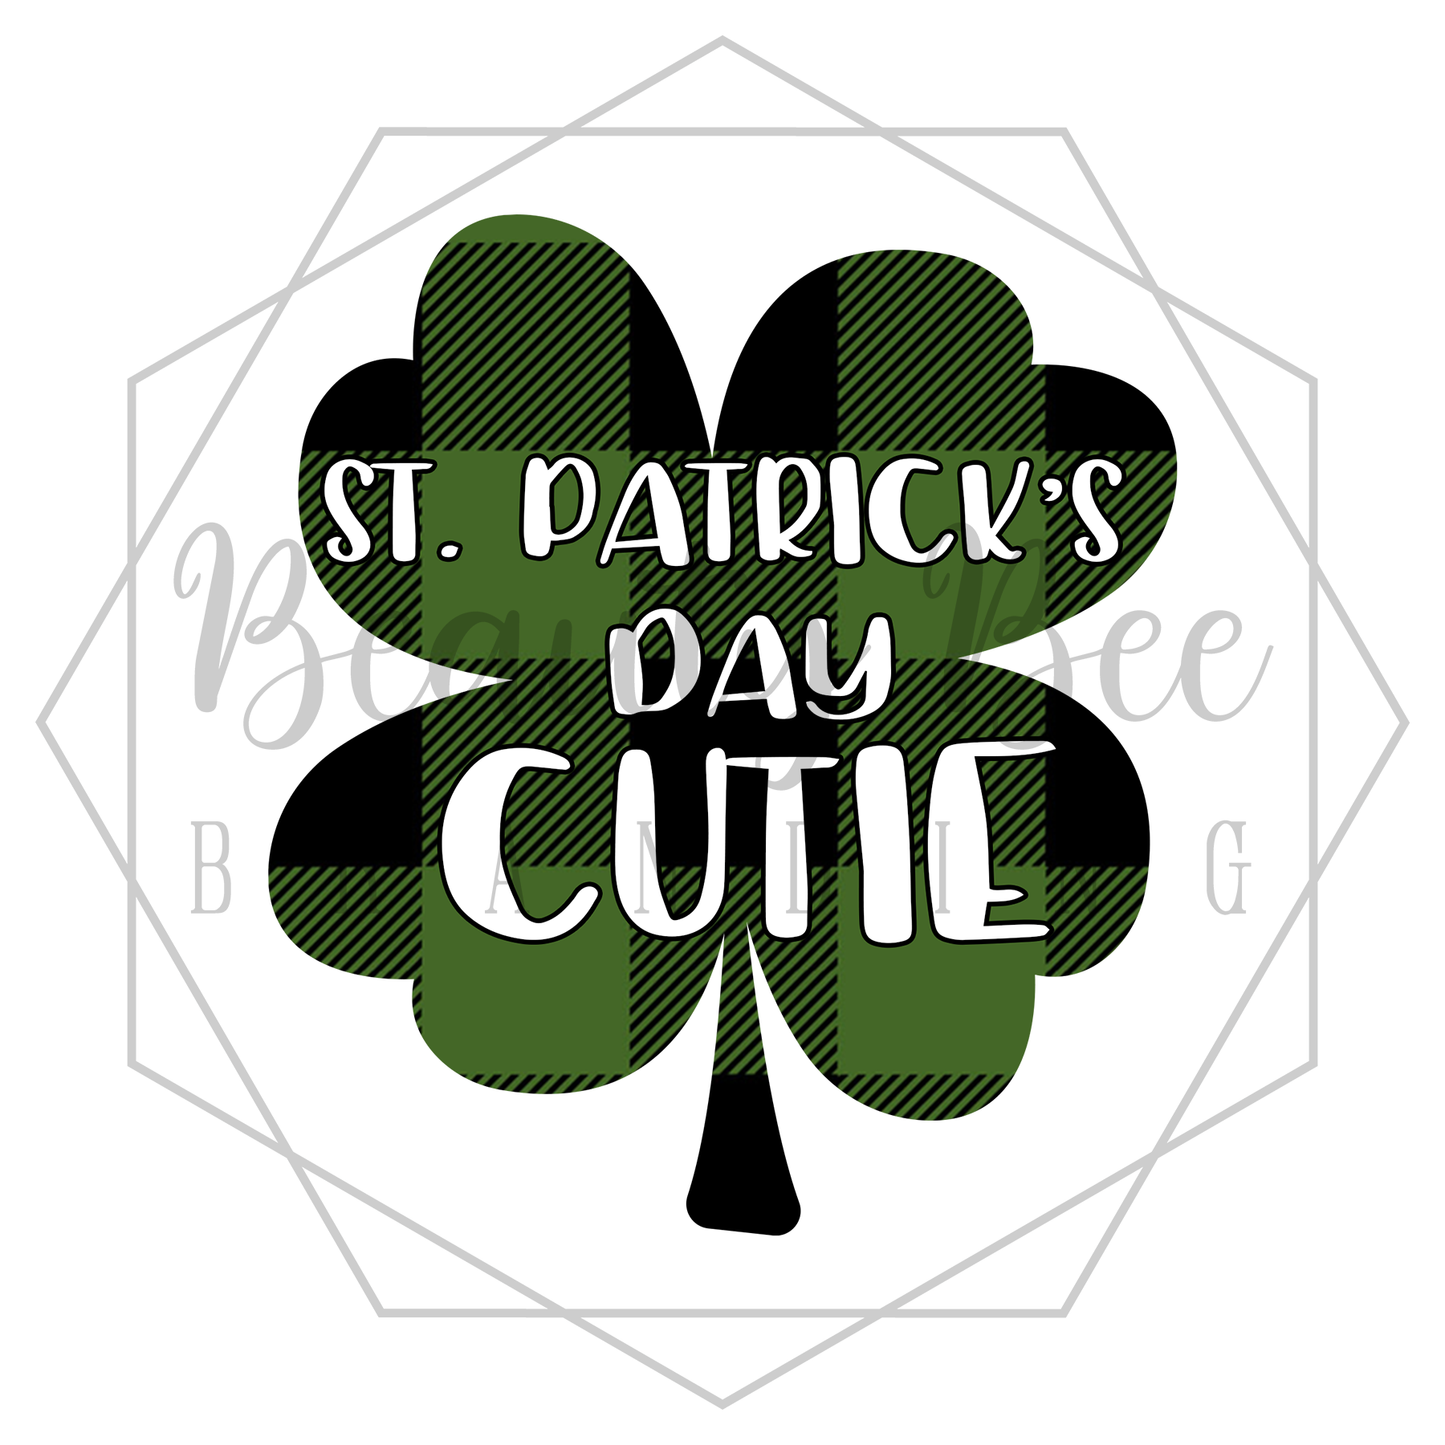 Green Plaid Clover St. Patrick's Day Cutie - Sublimation and Print & Cut Files